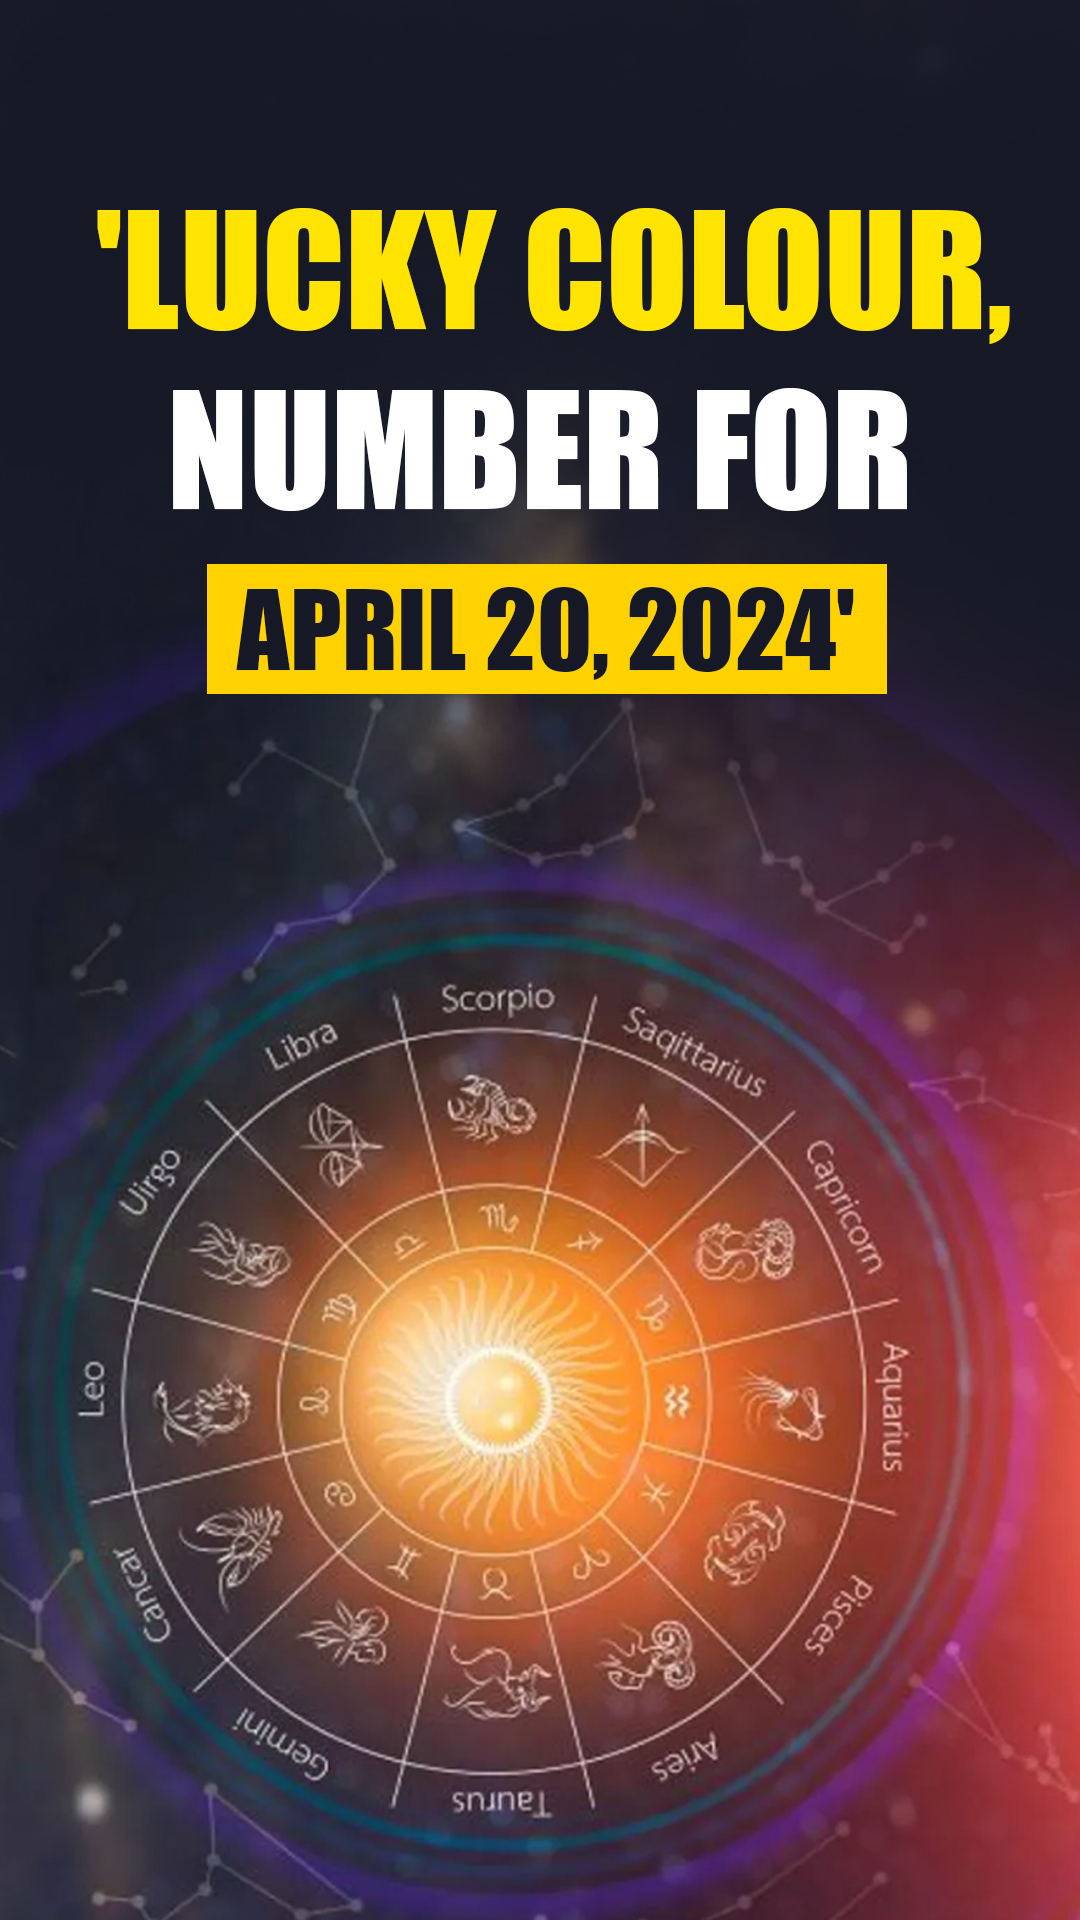 Know lucky colour, number for all zodiac signs in your horoscope for April 20, 2024